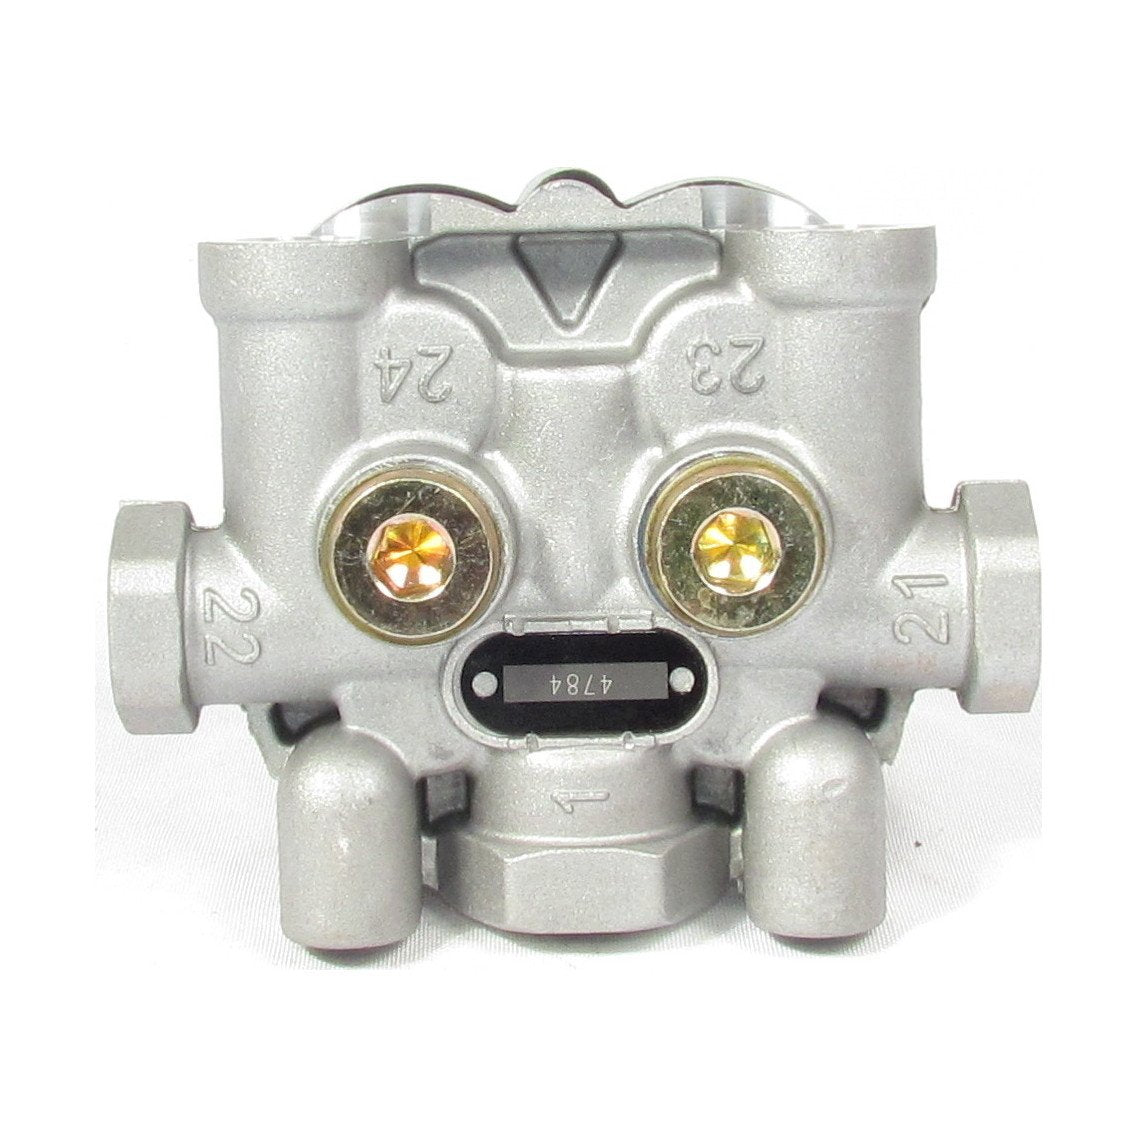 Fortpro Four Circuit Protection Valve - Air Inlet: M22x1,5mm - Air Delivery: M16x1,5mm - Replacement for AE4170 | F224784